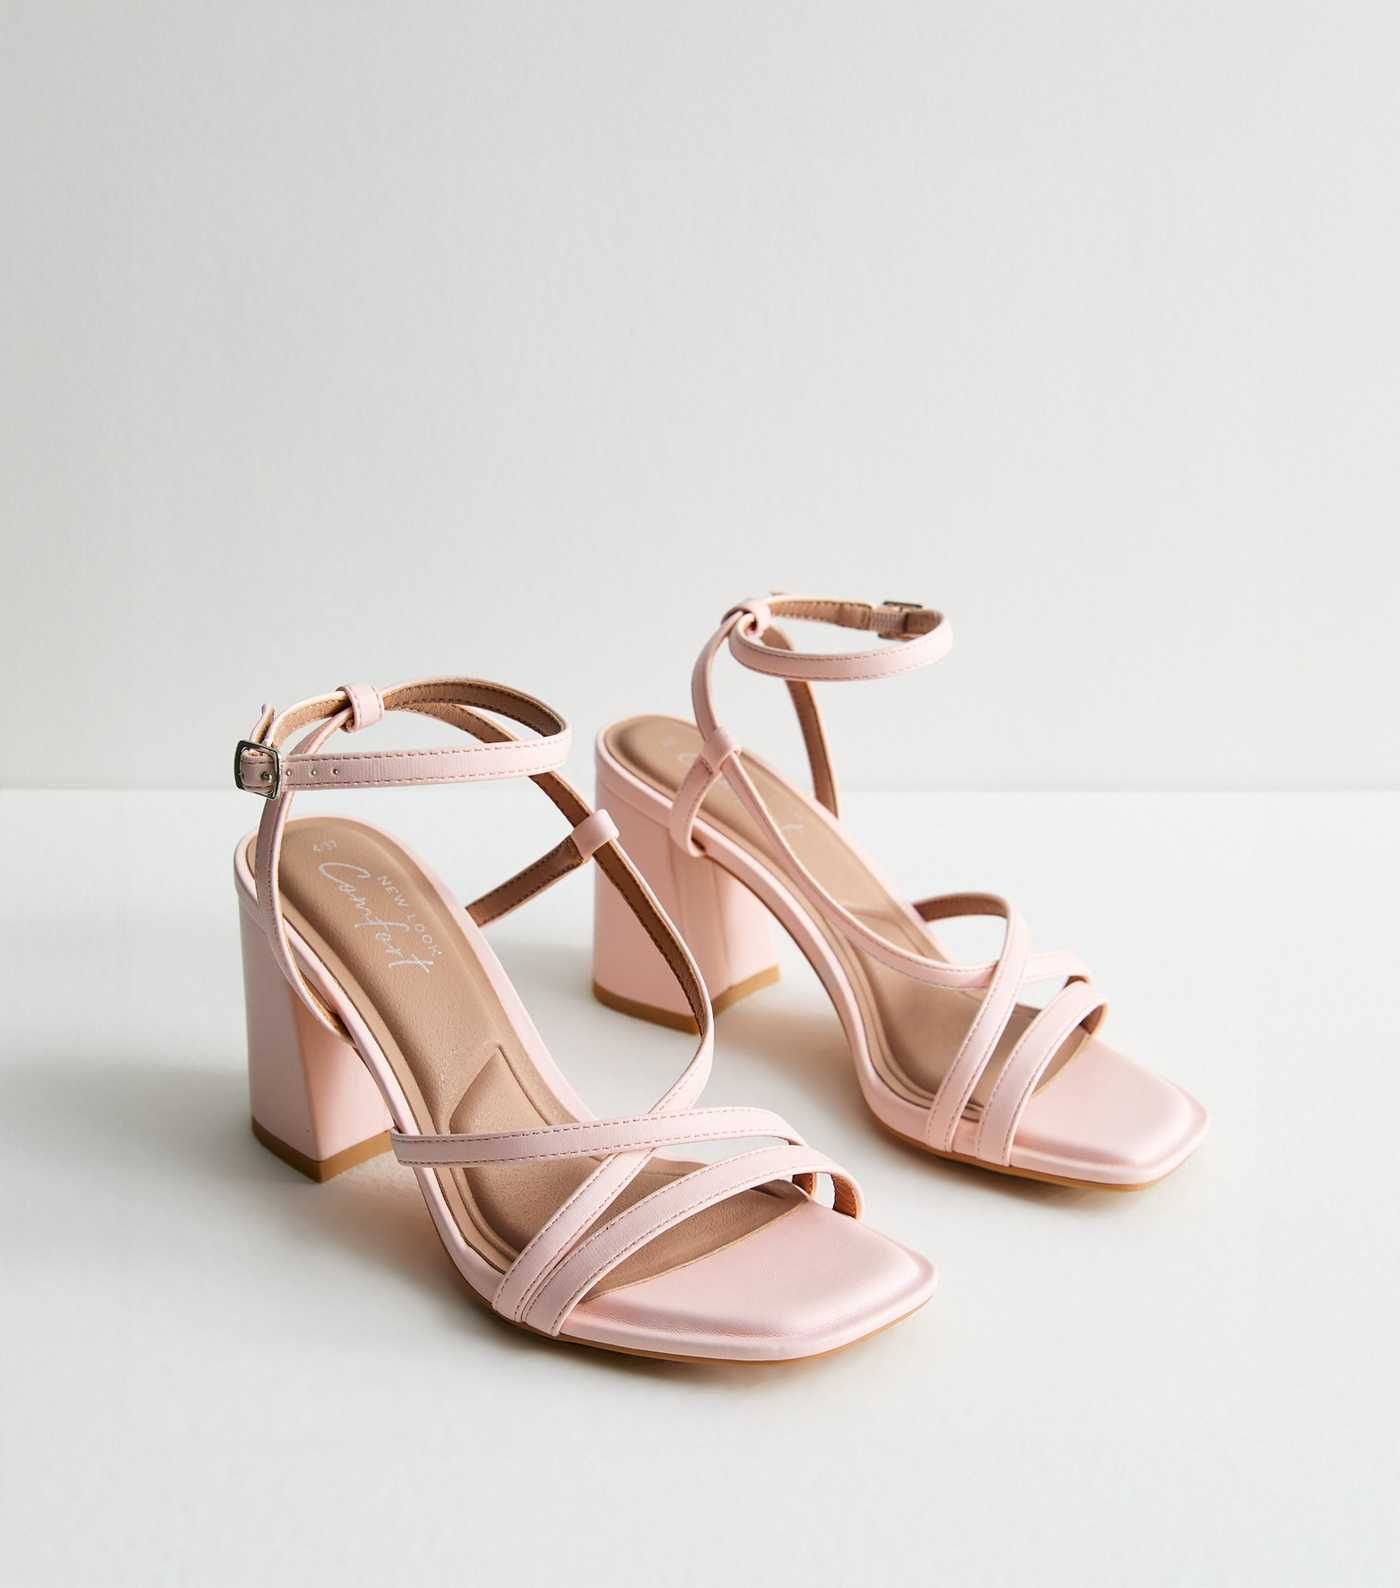 Pink Strappy Block Heel Sandals
						
						Add to Saved Items
						Remove from Saved Items | New Look (UK)